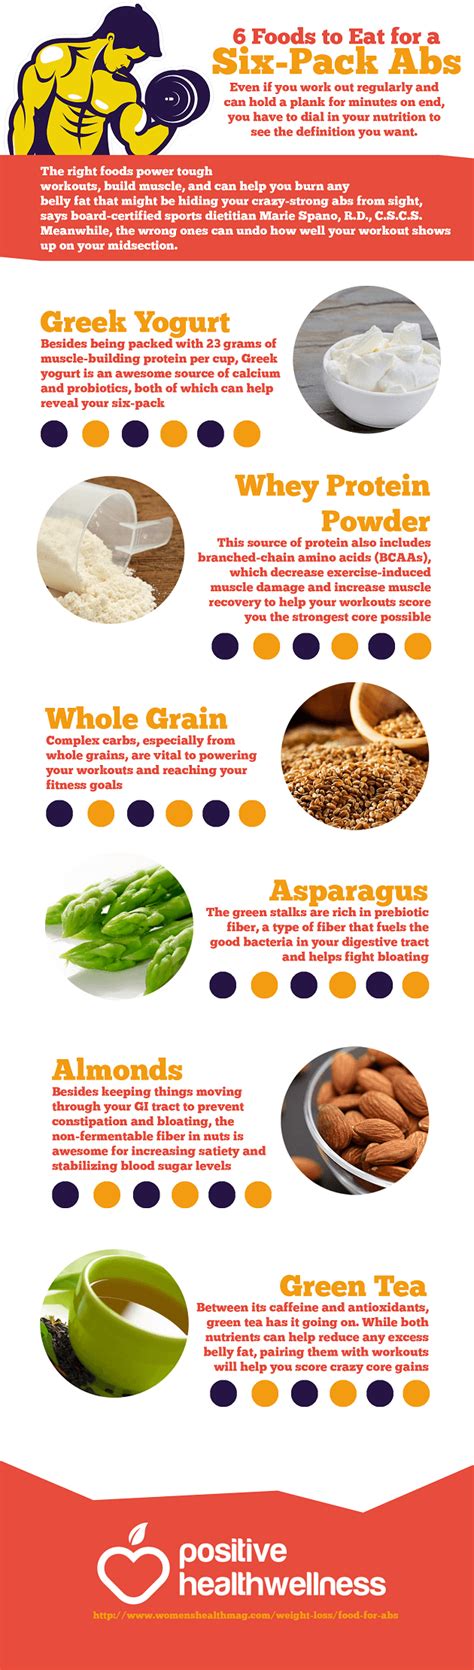 6 Foods To Eat For A Six Pack Abs Infographic